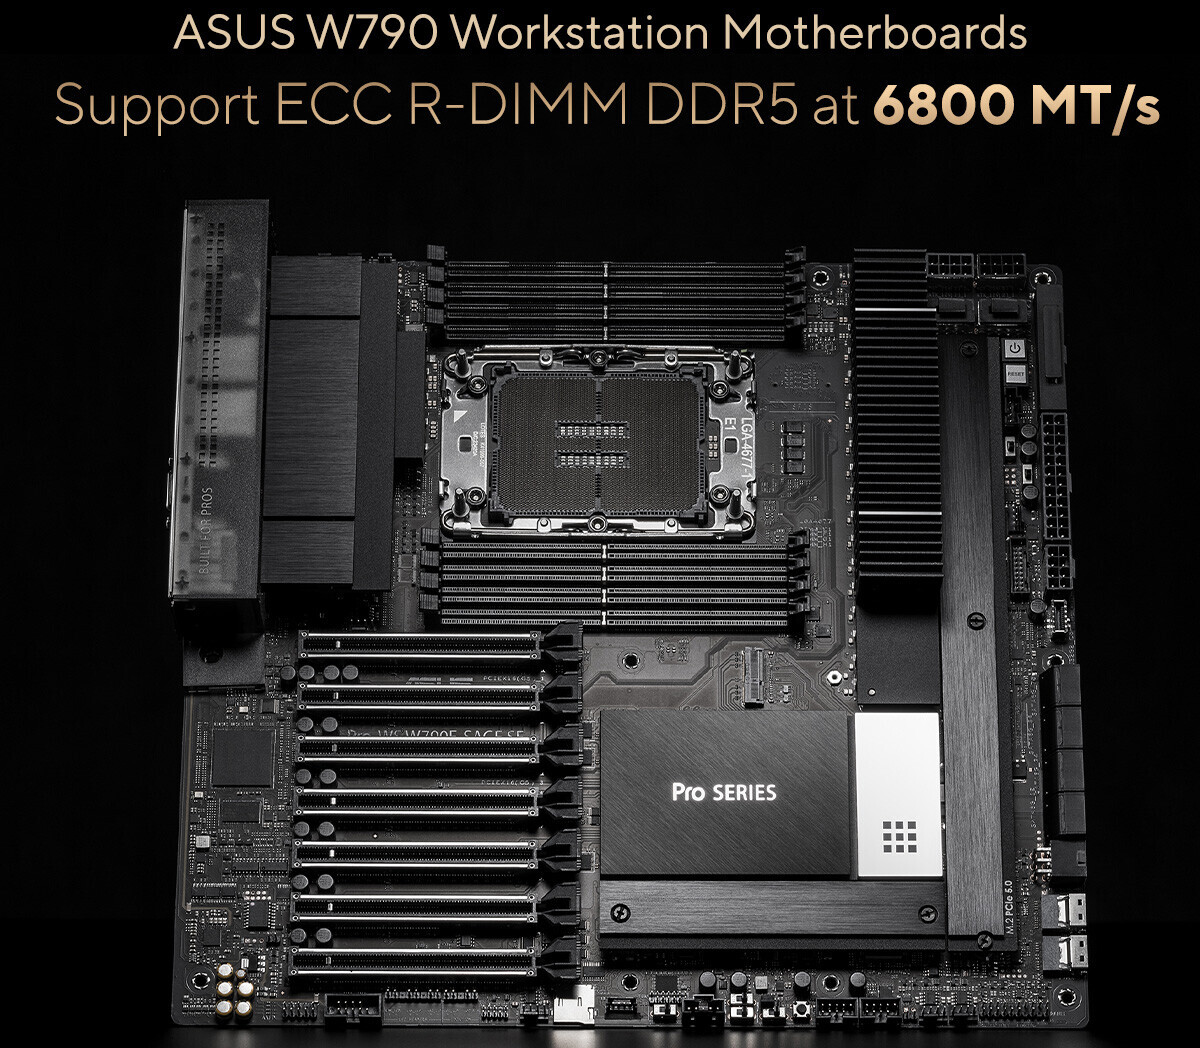 Motherboard support. ASUS Pro WS w790-Ace. ASUS Pro WS w790e-Sage se [ddr5]. ASUS Sage w790. ASUS Sage 790.